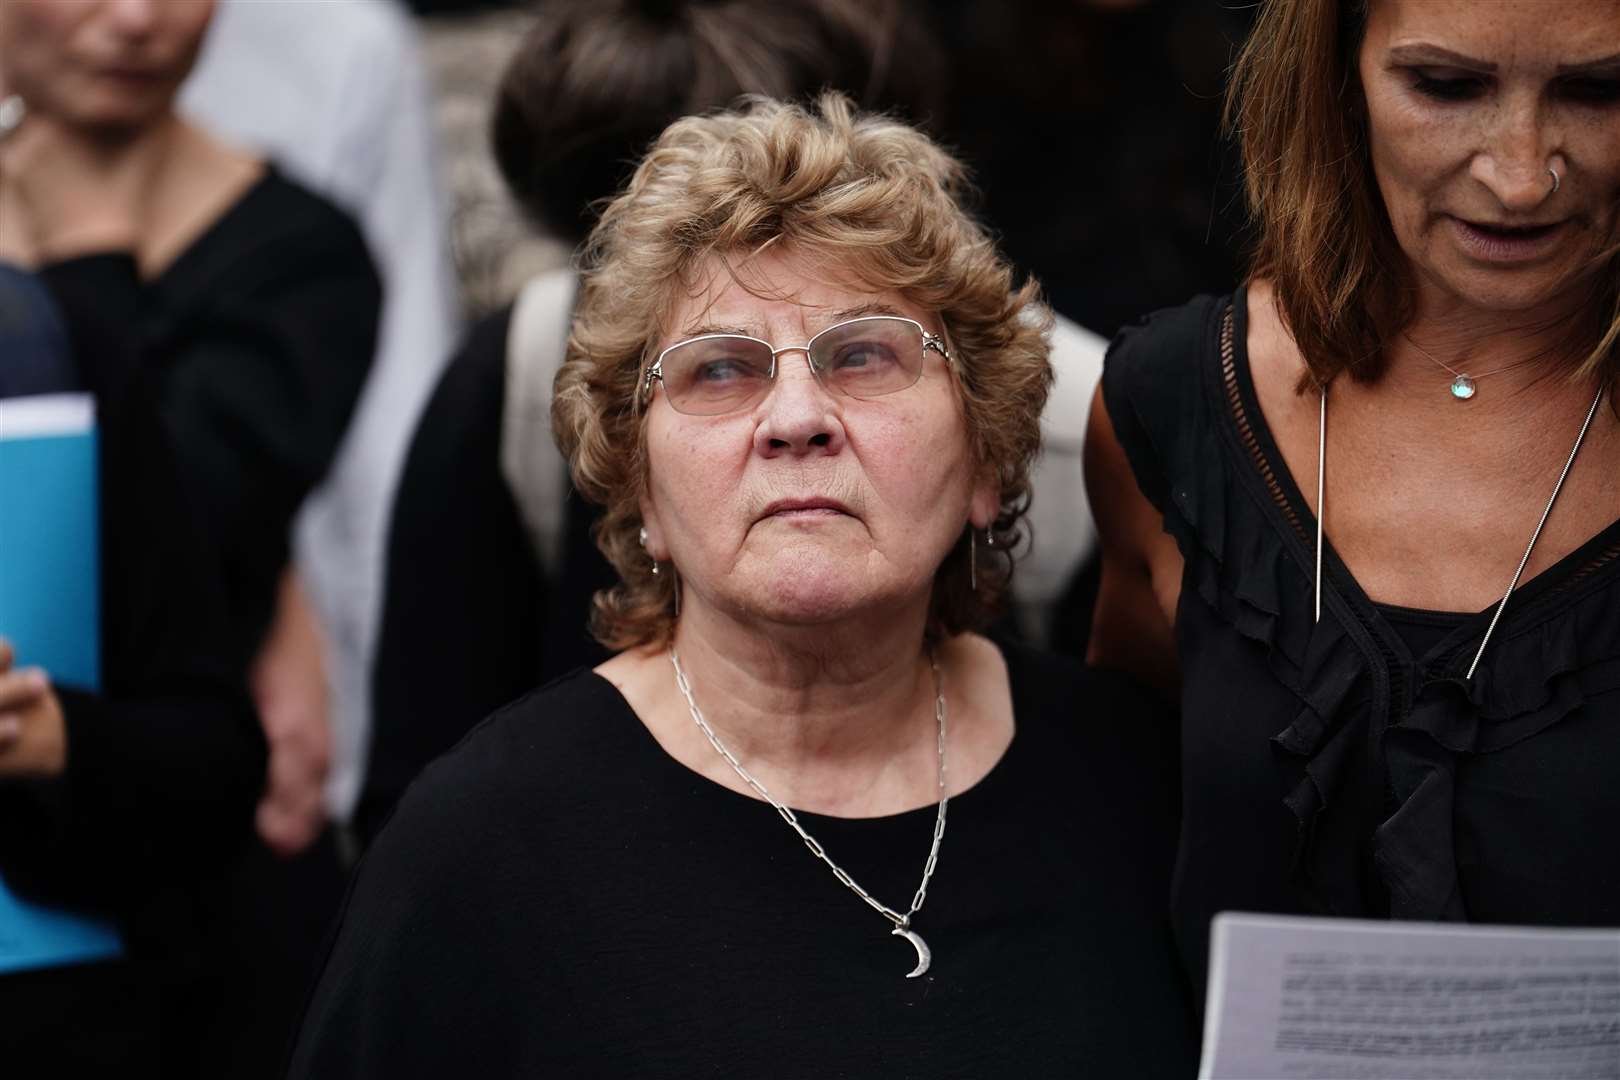 Mr Malkinson’s mother Tricia outside the Royal Courts of Justice (Jordan Pettitt/PA)